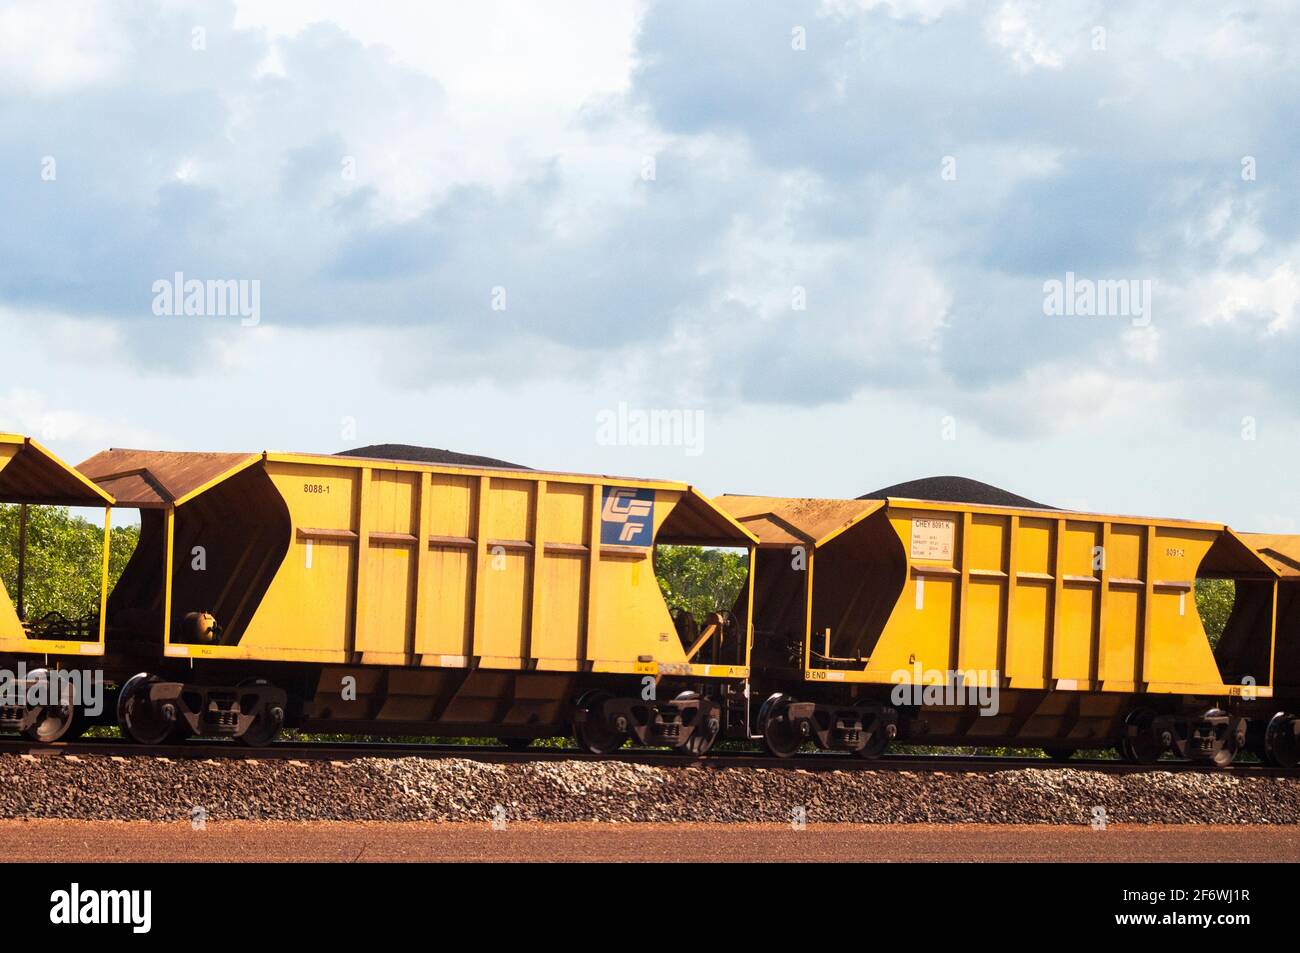 Freight cars of The Ghan transcontinental railway at Berrimah Terminal outside Darwin, Northern Territory, Australia Stock Photo